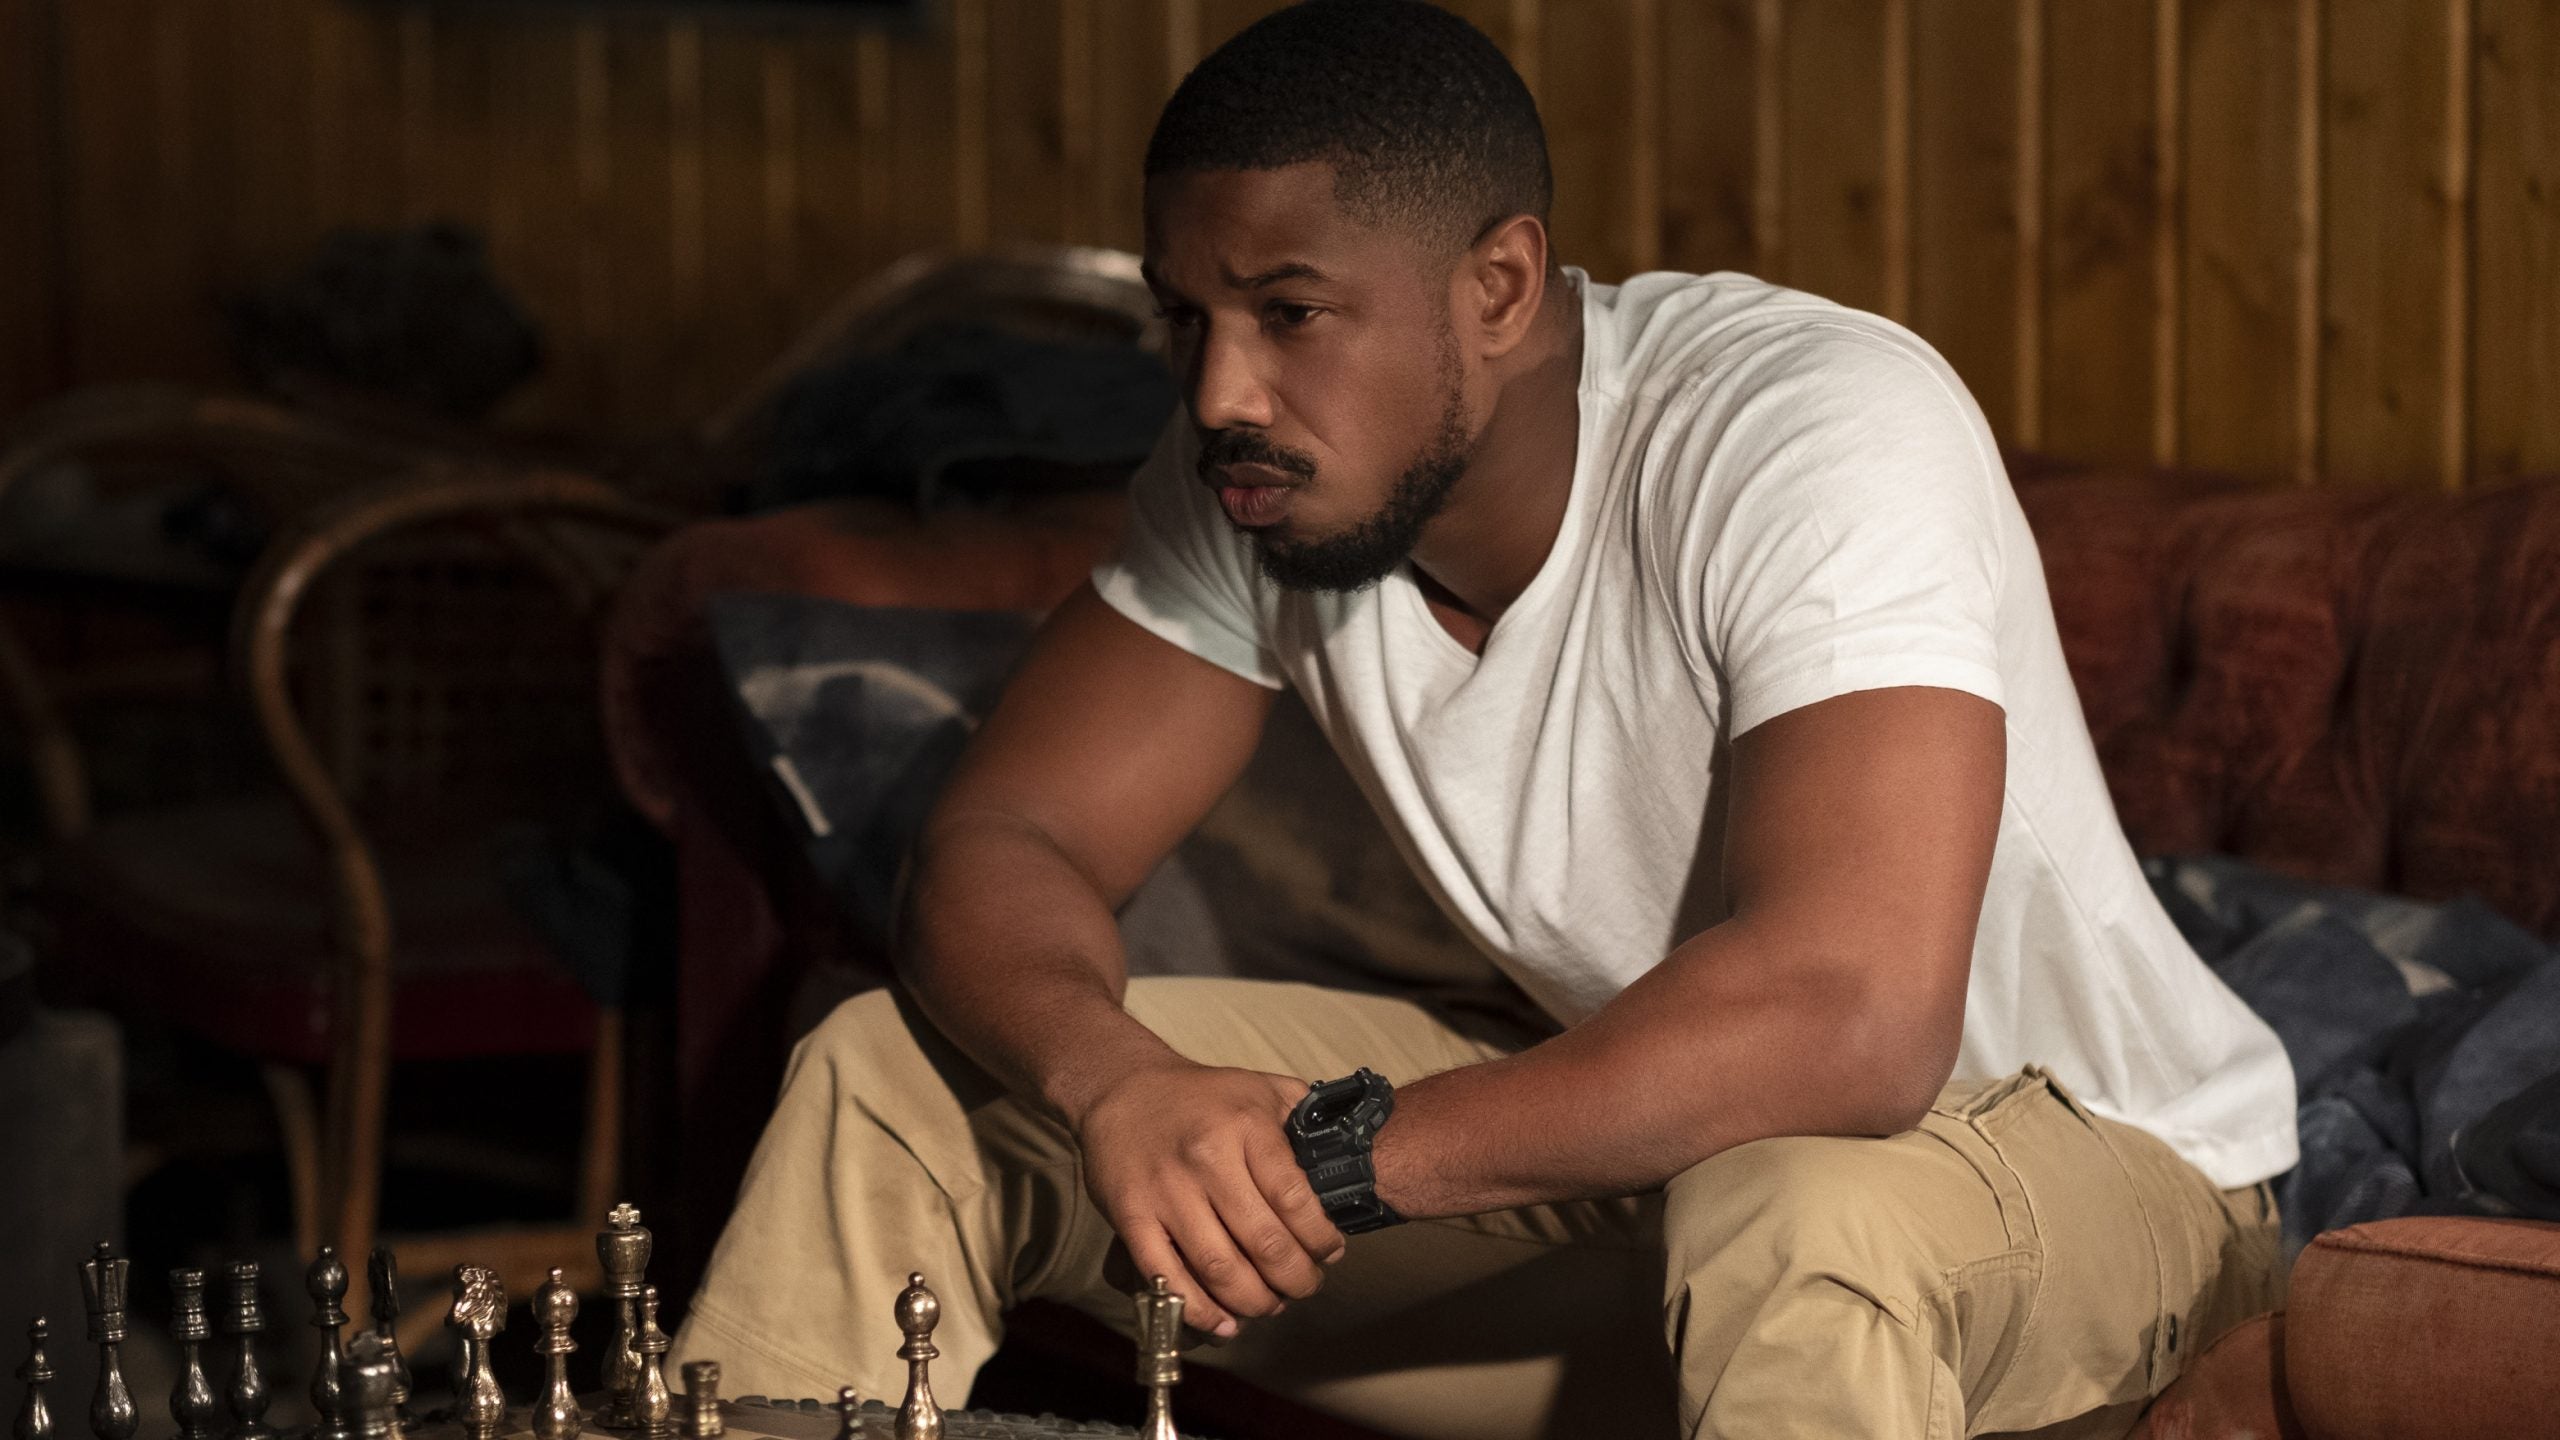 Michael B. Jordan Says Lauren London’s Transparency About Grief Helped His Acting In ‘Without Remorse’